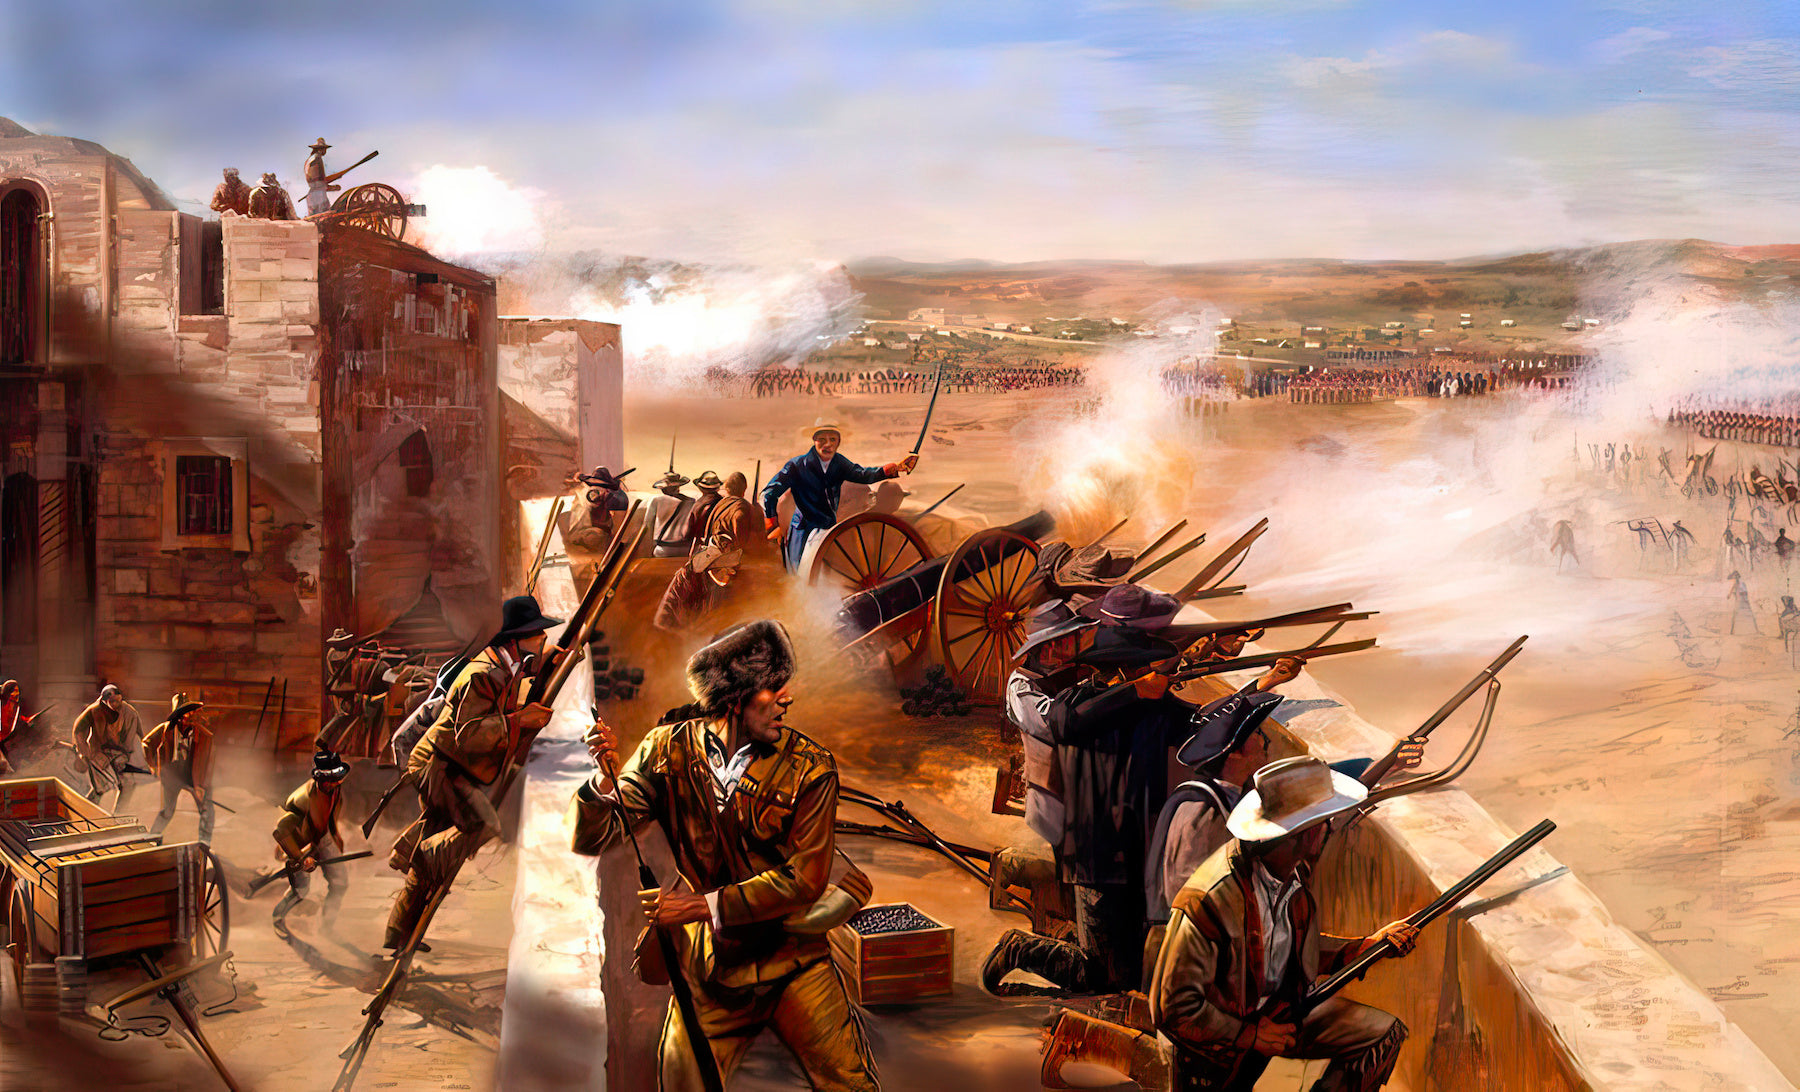 Battle of the Alamo - Painting 